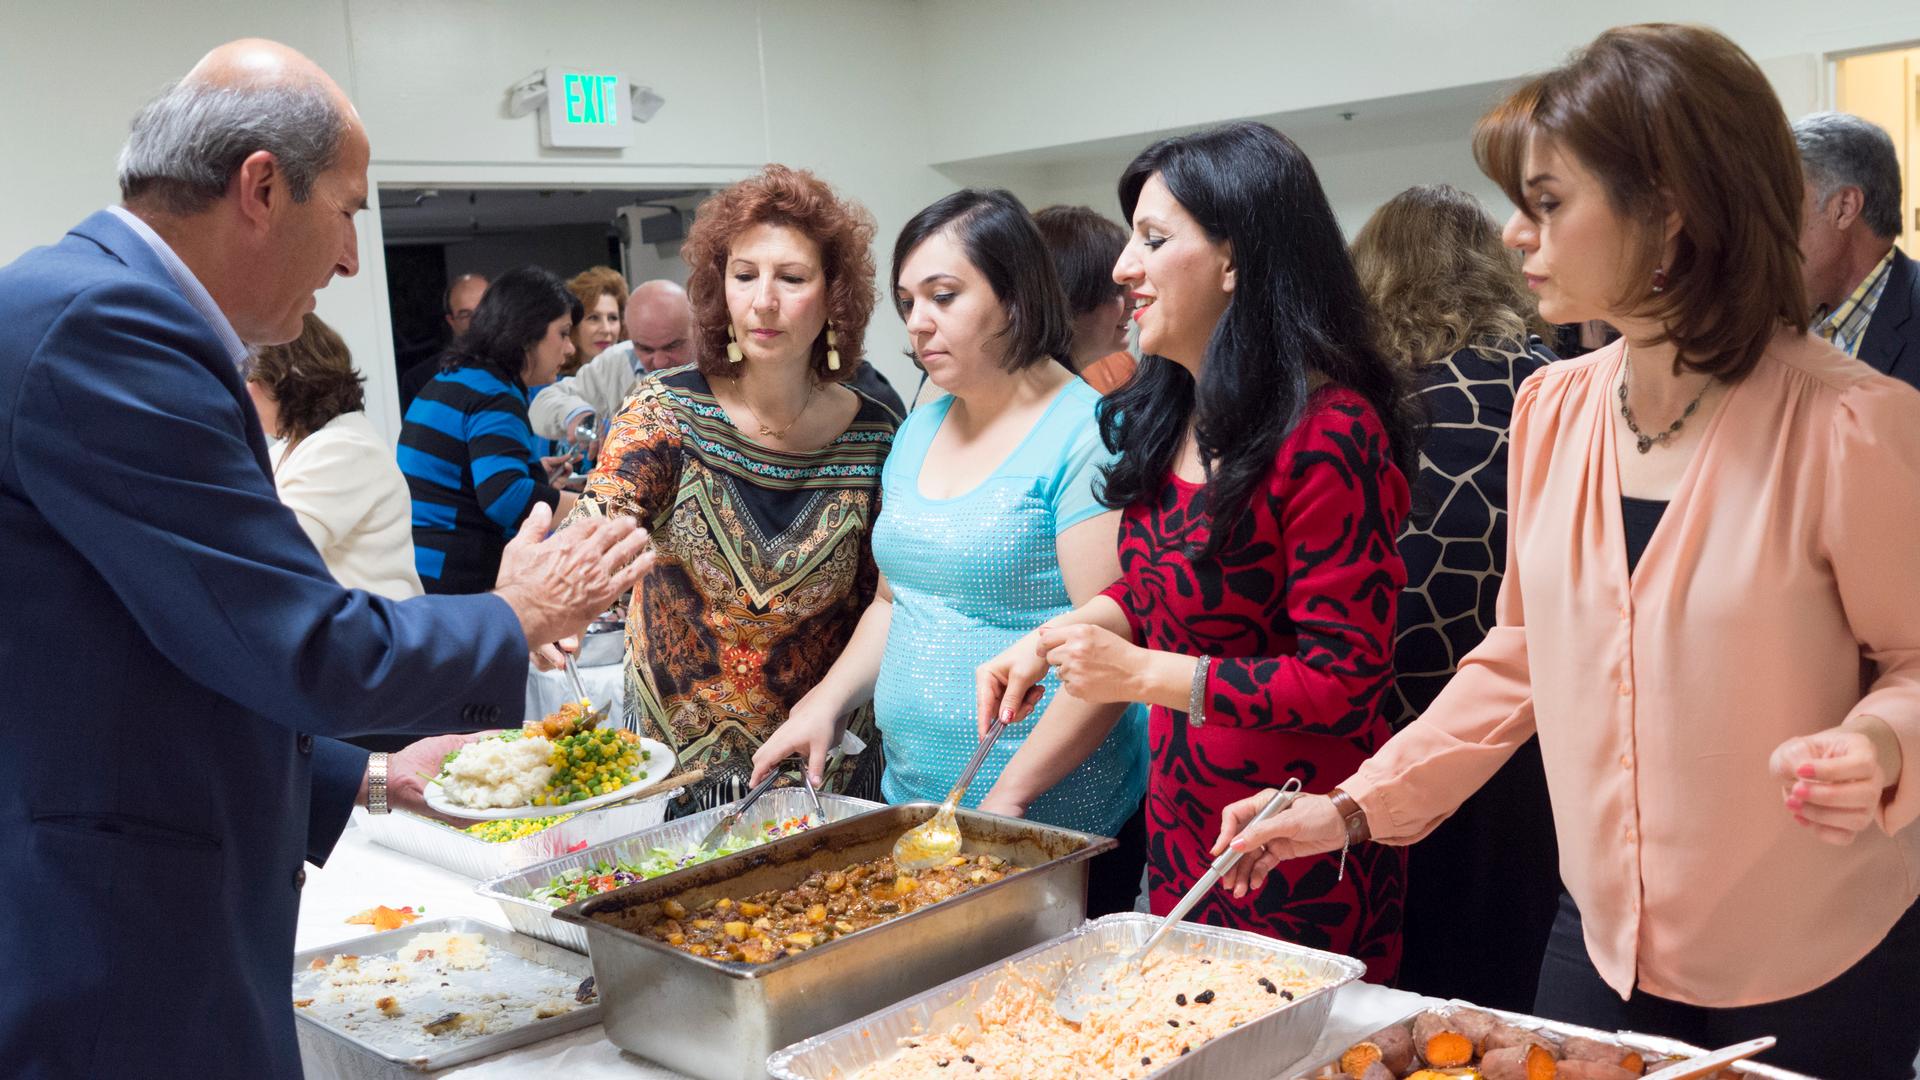 A large number of Armenian refugees live in the Los Angeles area. Every year the Armenian Christ Church hosts a Thanksgiving feast featuring traditional American and Armenian dishes.